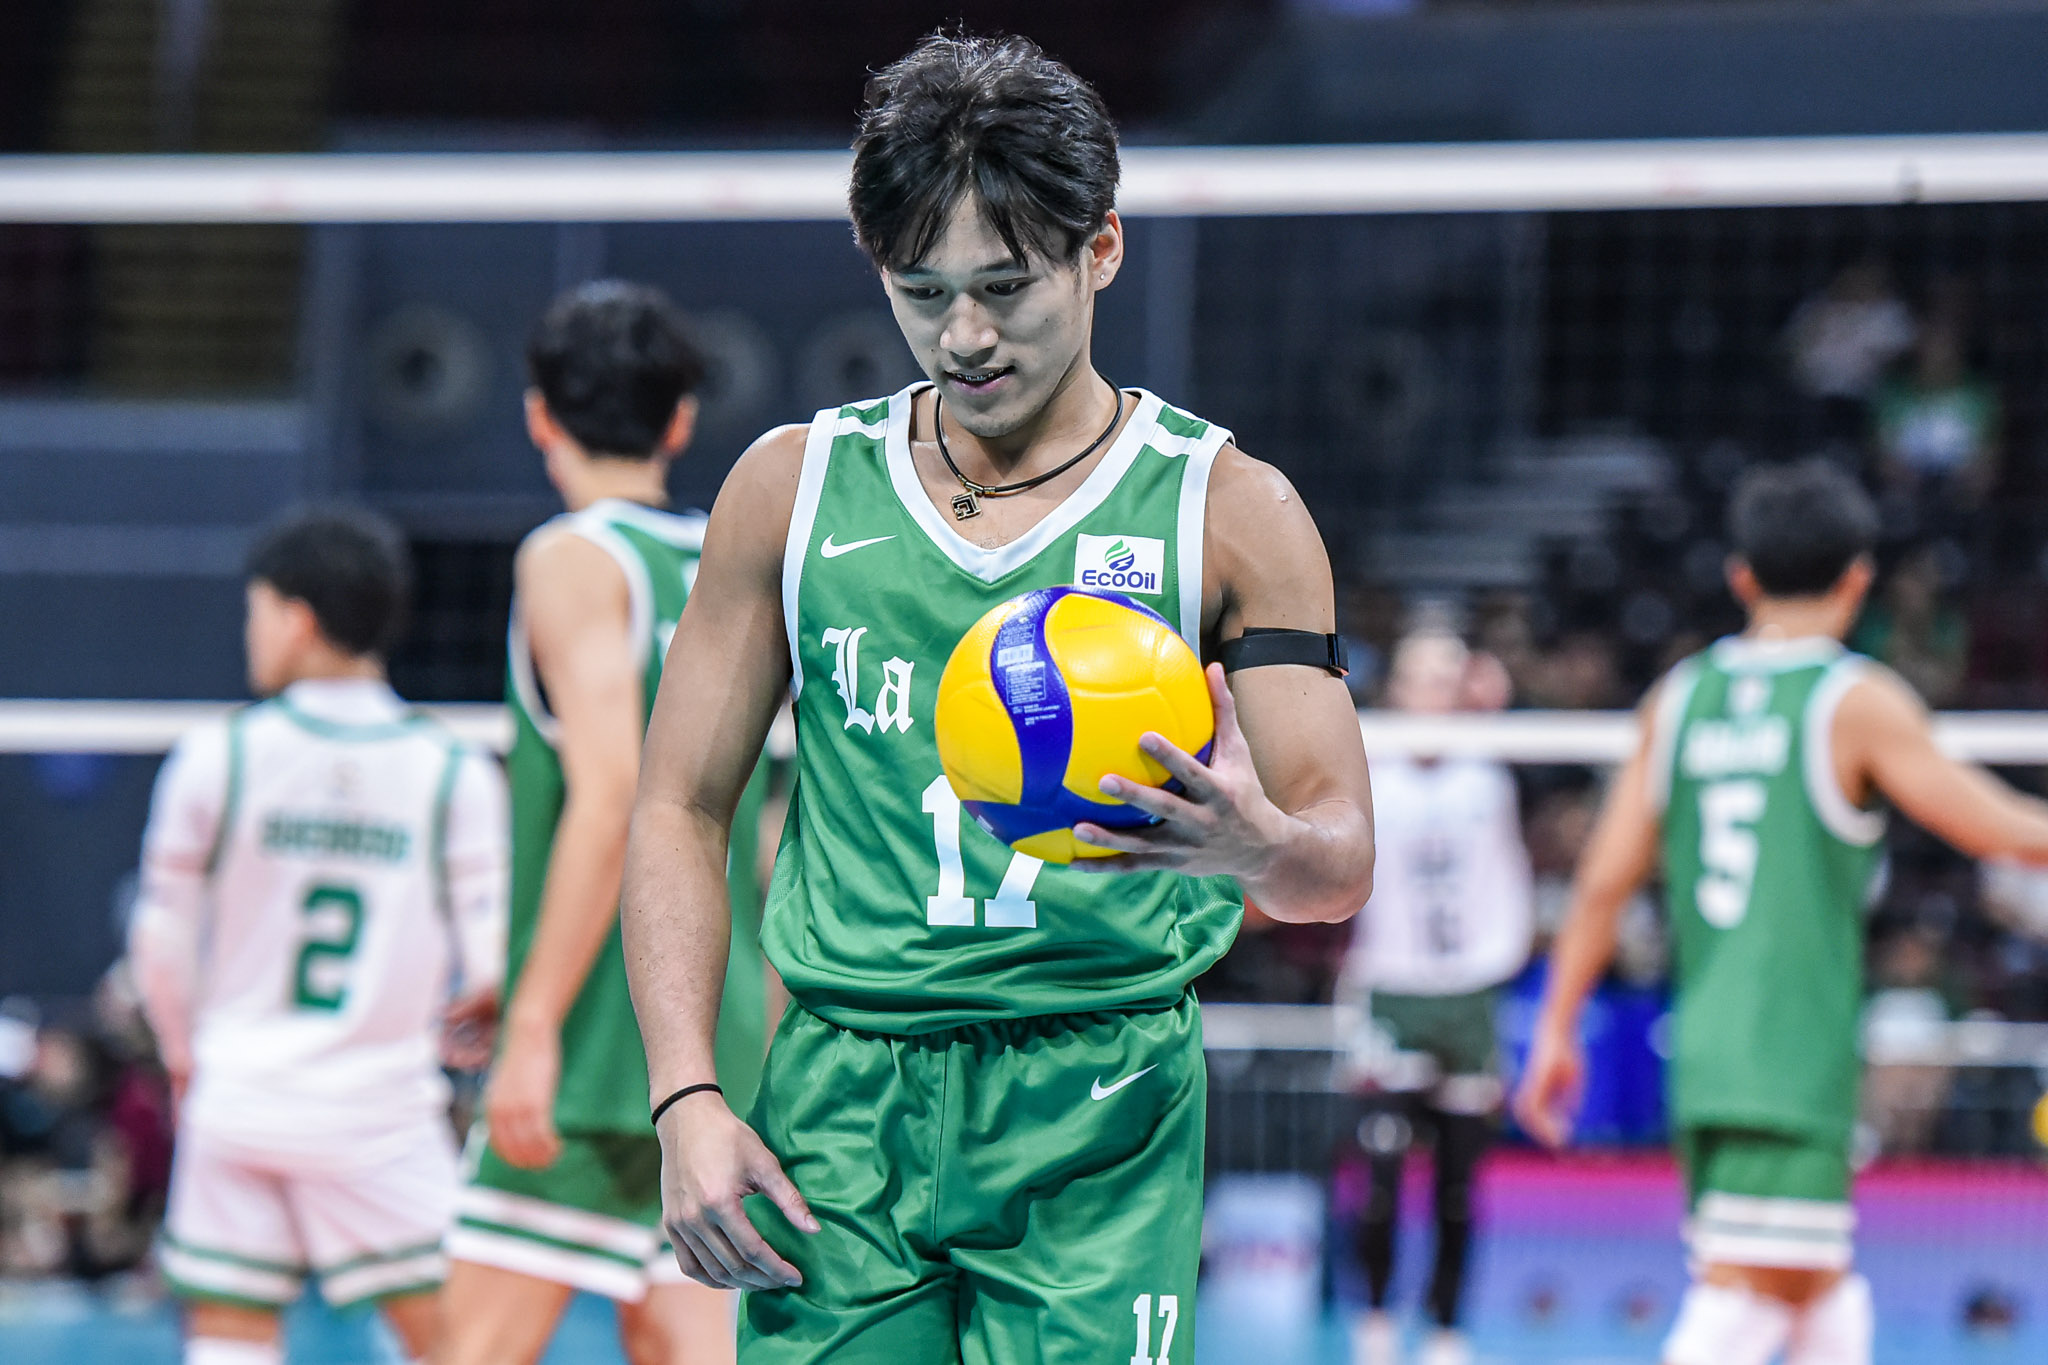 Vince Maglinao La Salle UAAP volleyball